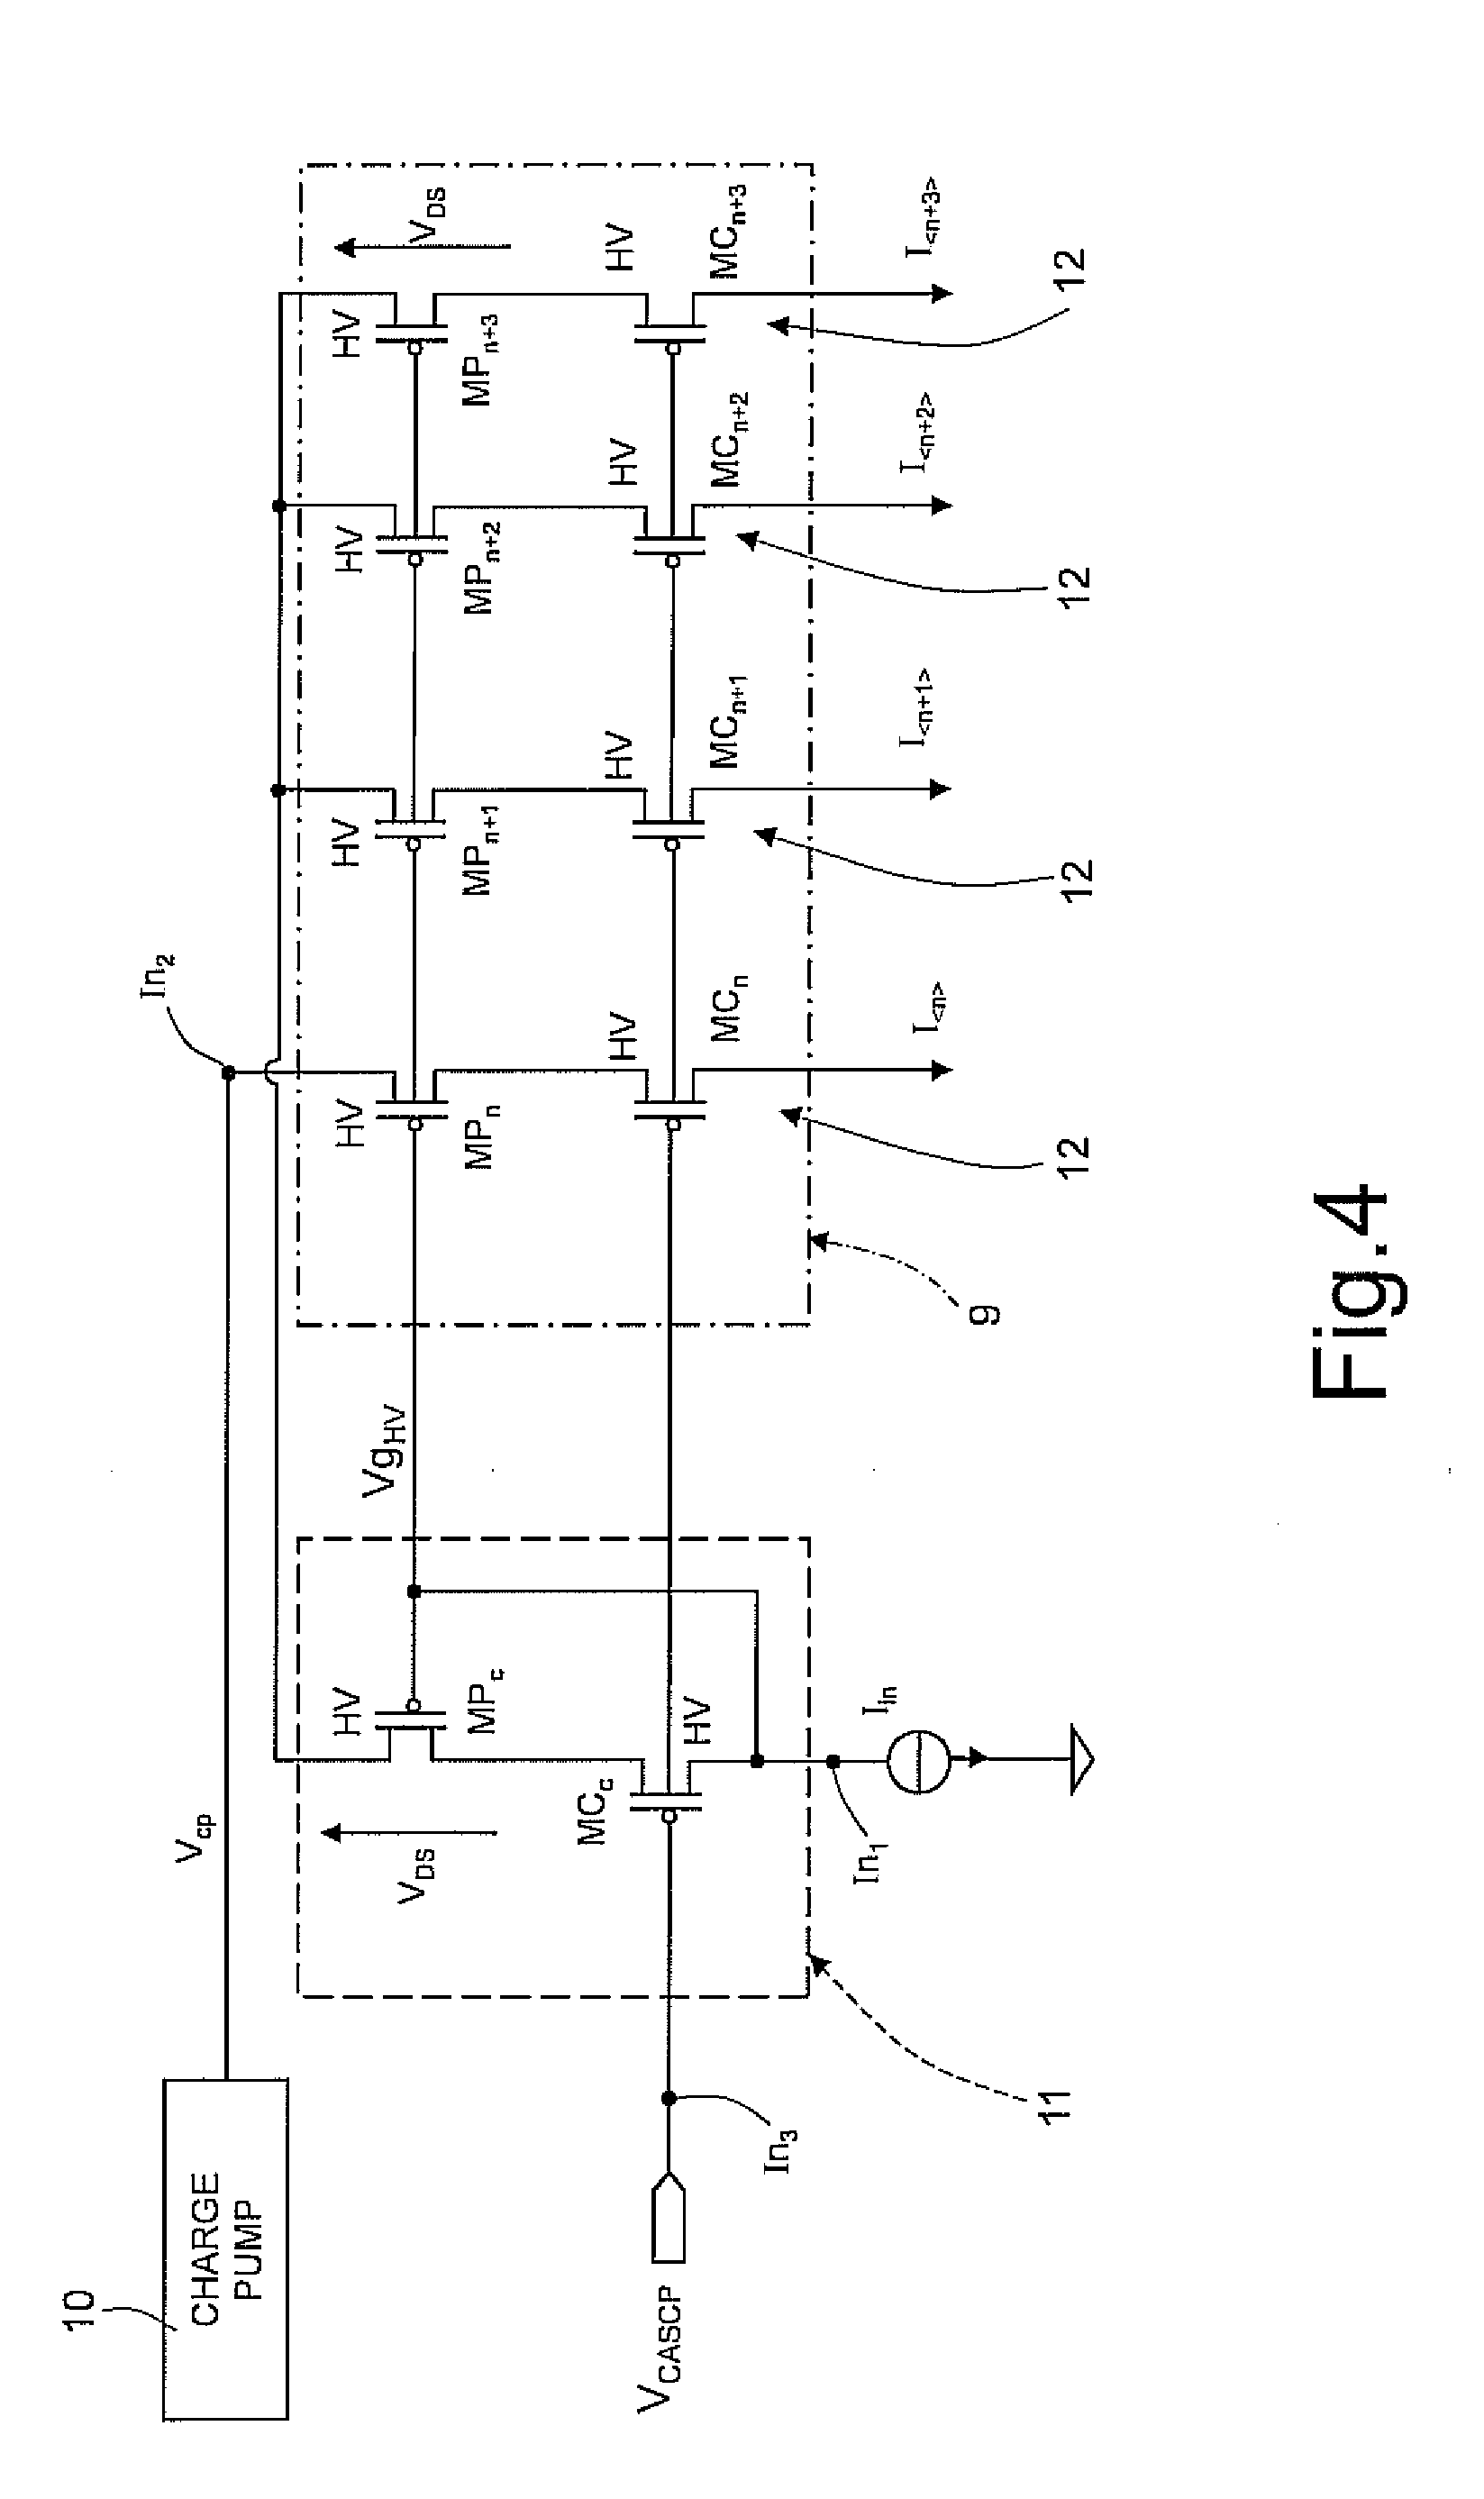 High-efficiency driving stage for phase change non-volatile memory devices